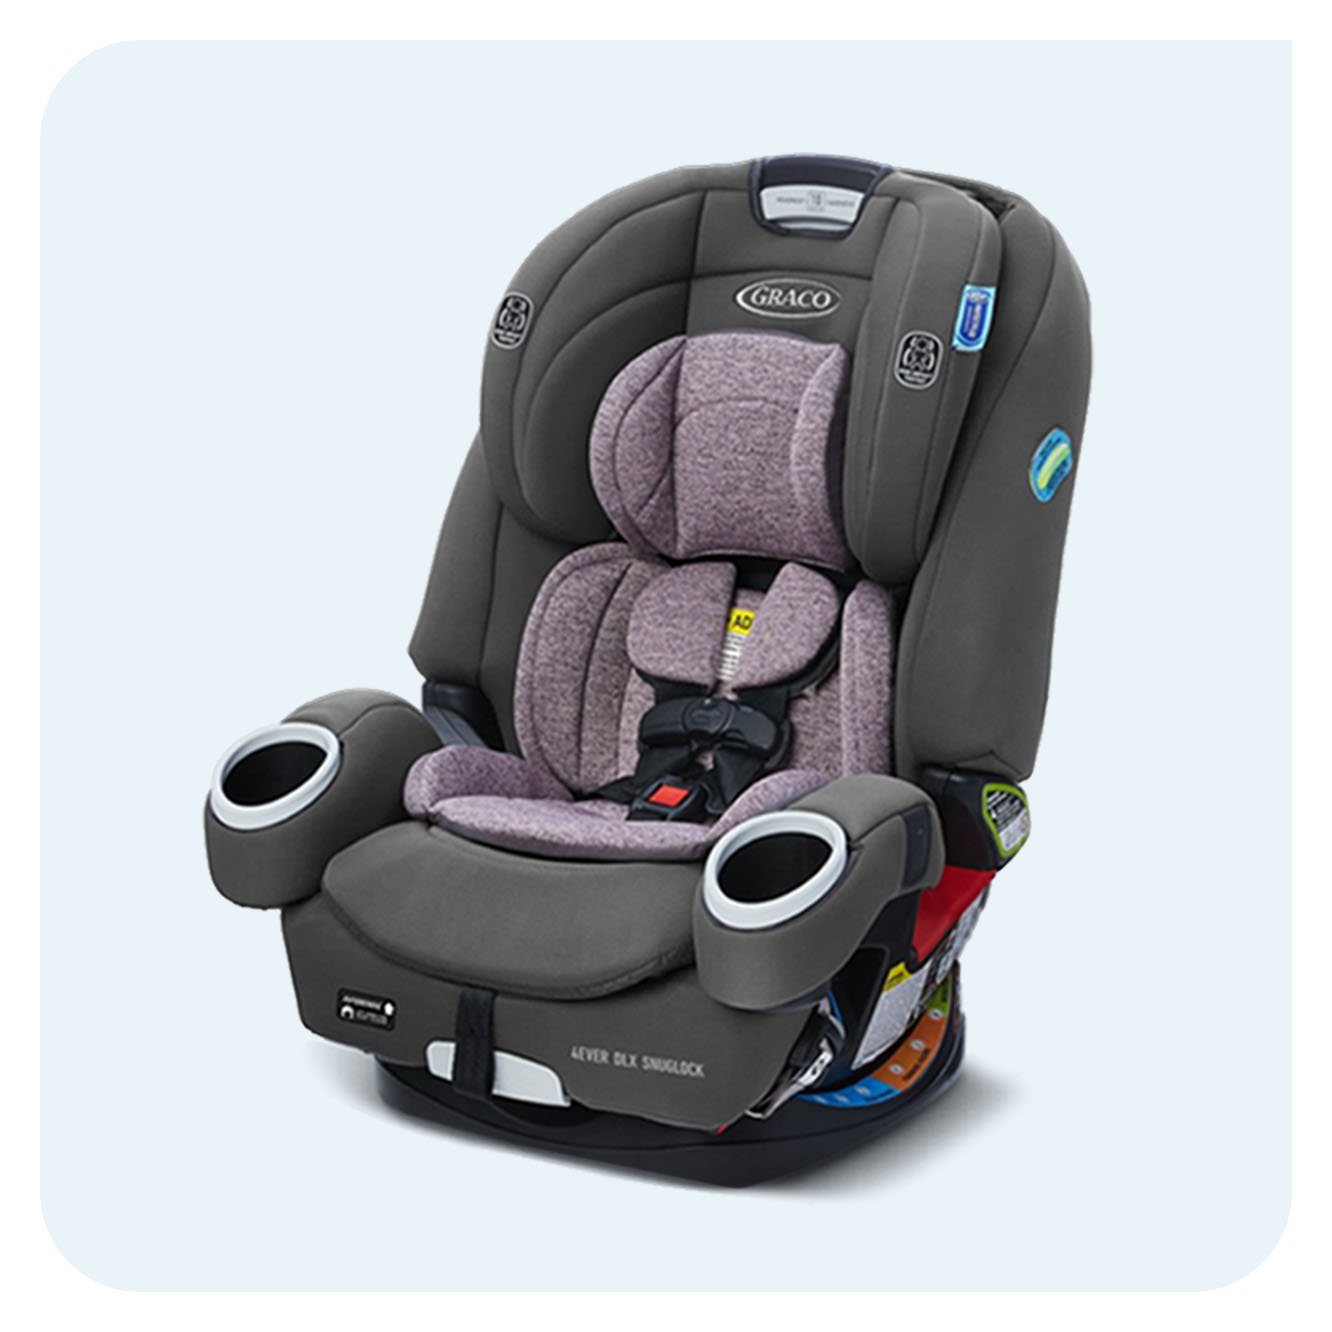 Graco Baby Trusted Products And